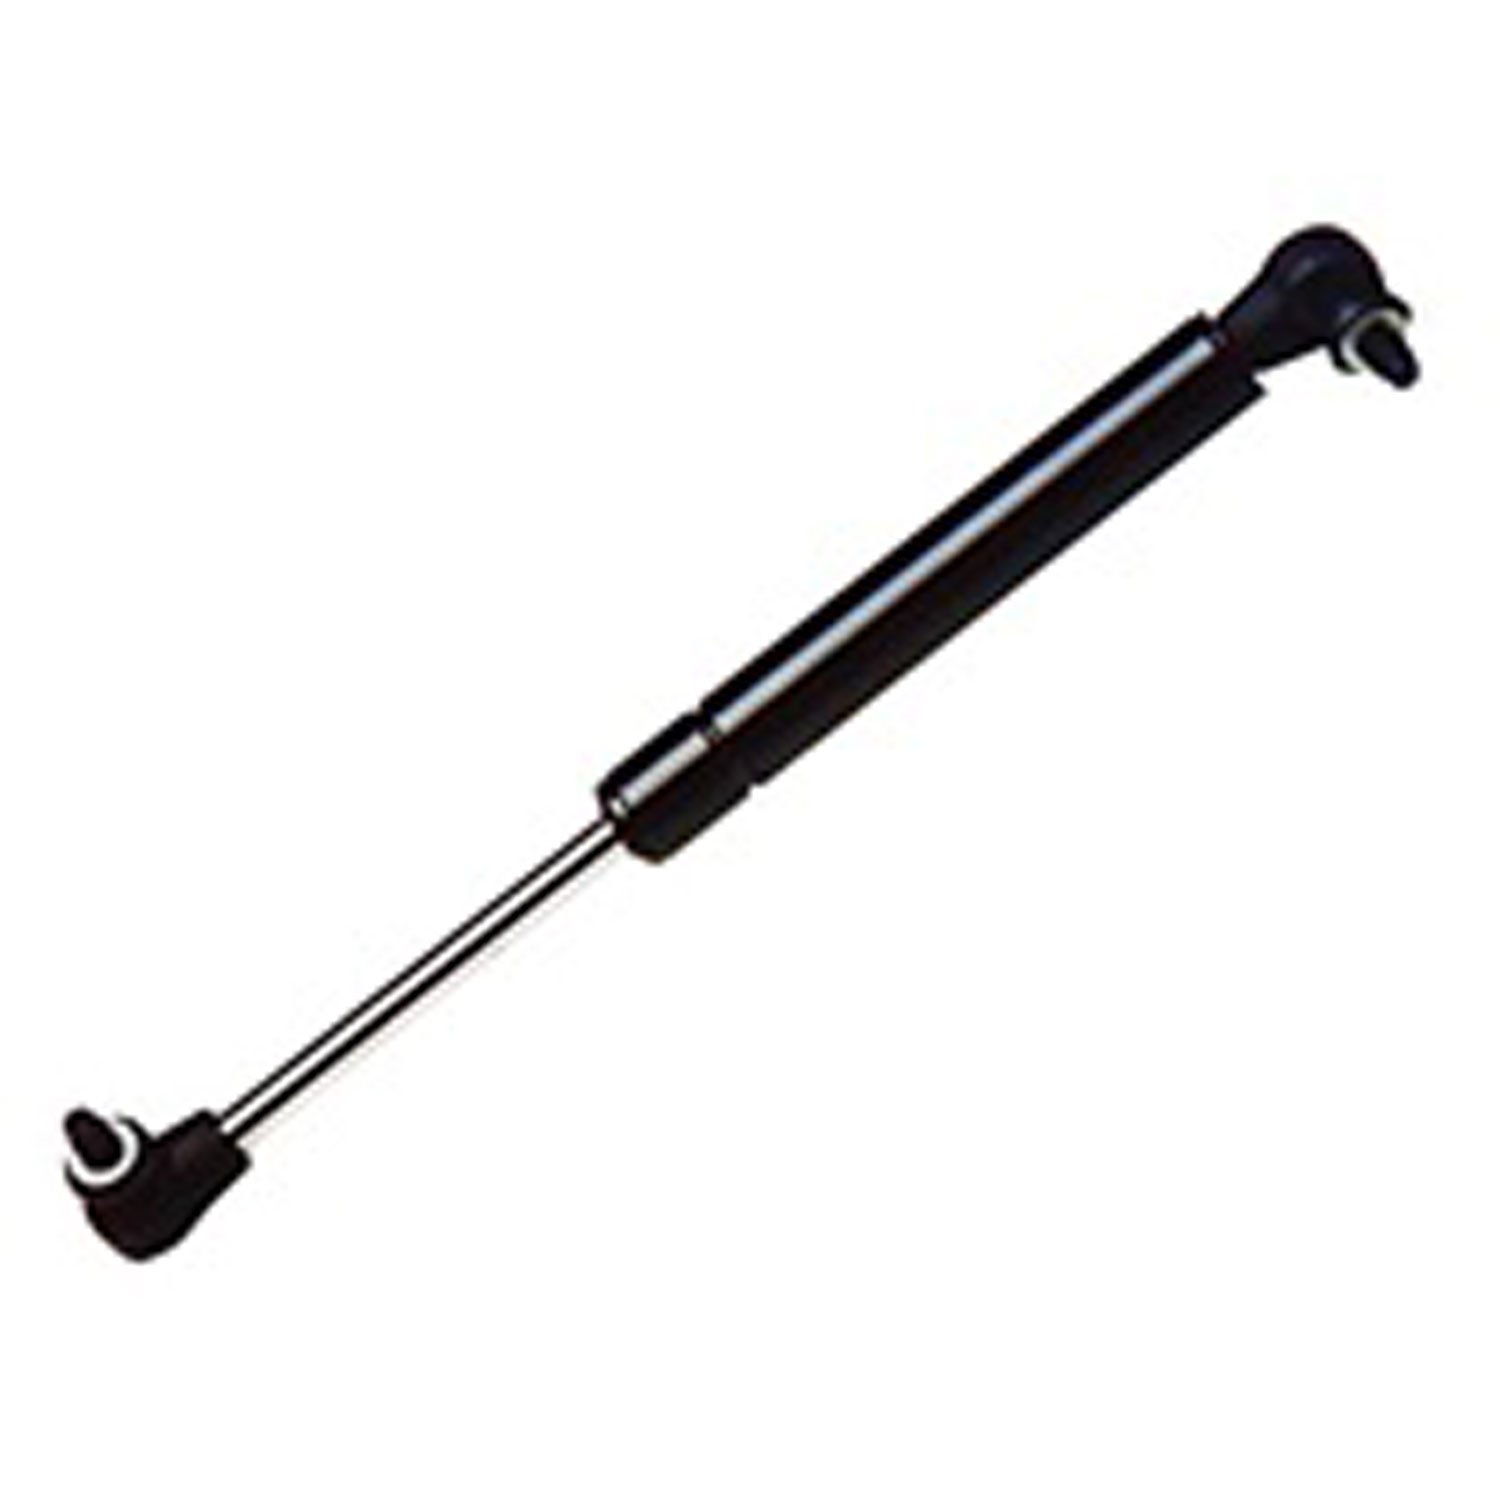 Replacement gas strut from Omix-ADA, Fits liftgate on 05-10 WK Grand Cherokee Will fit left or right side.